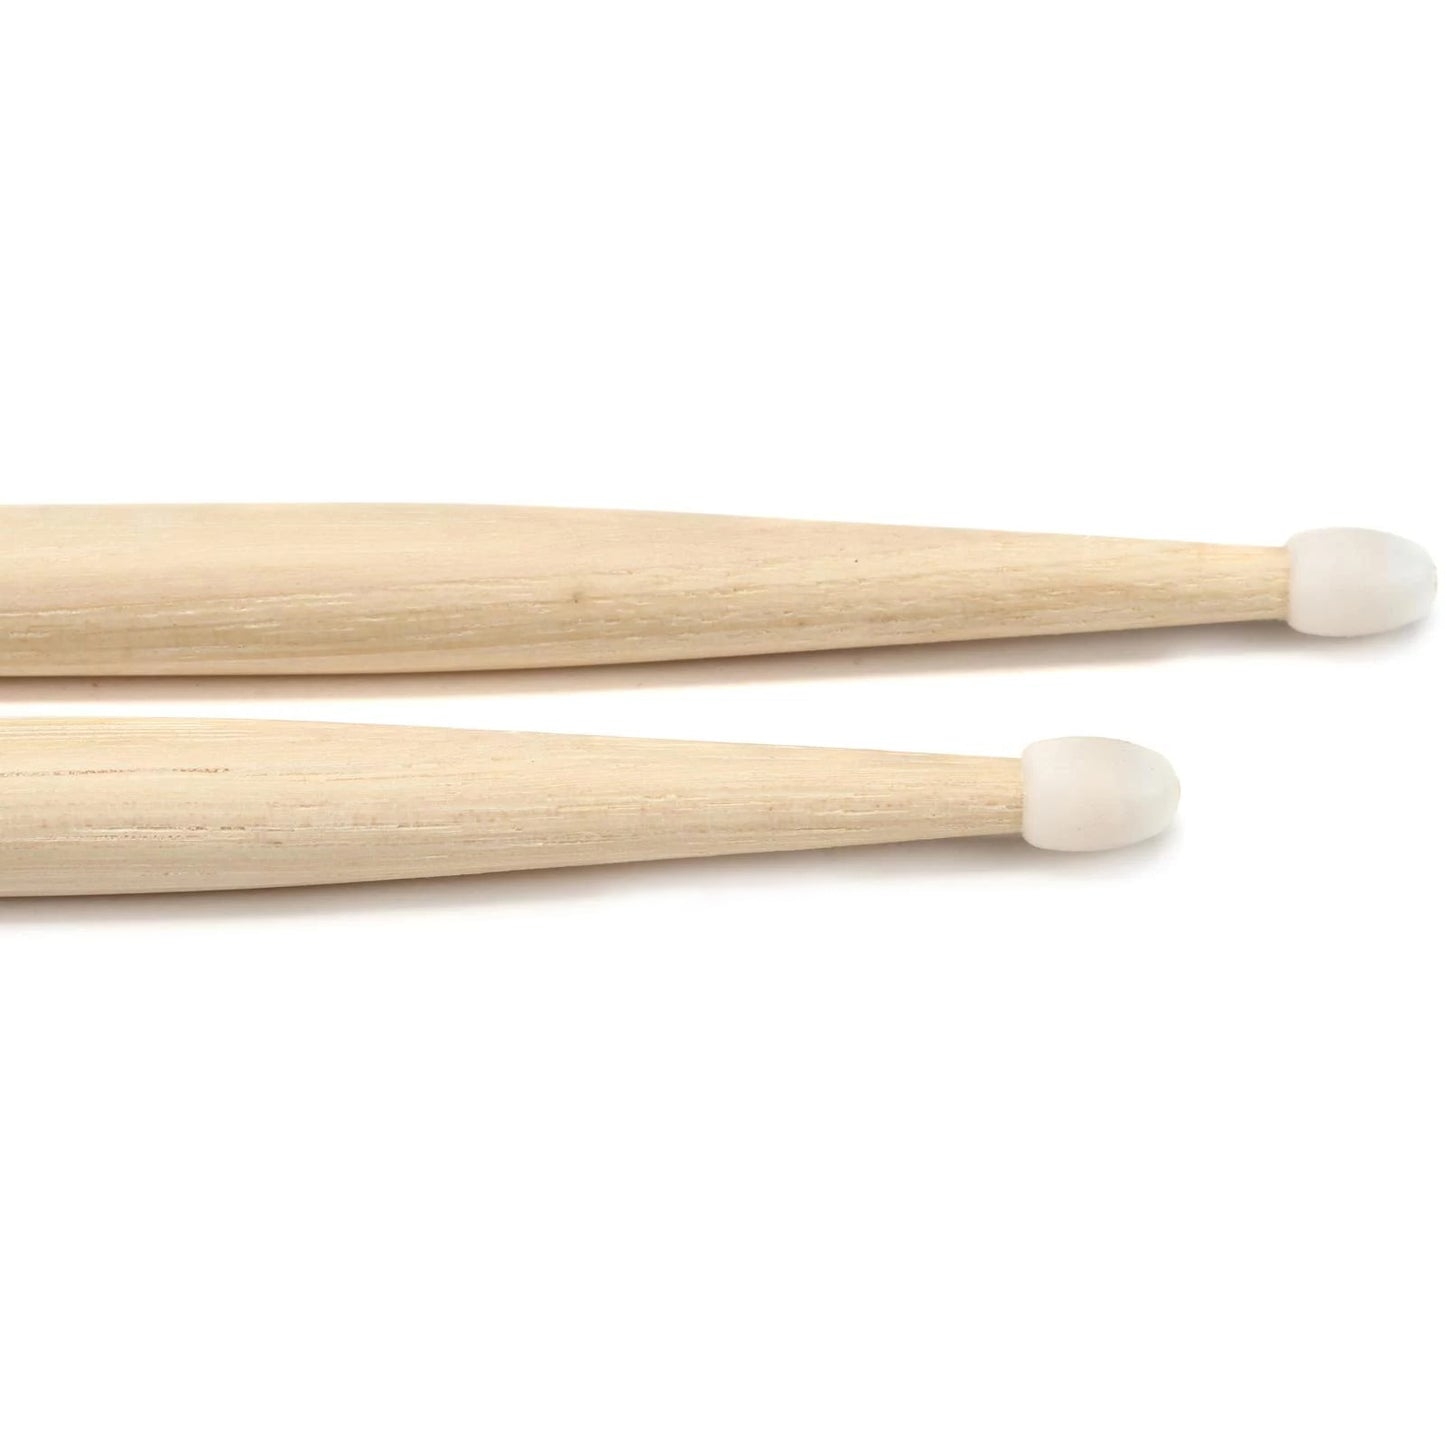 Vic Firth American Classic Extreme 5A Hickory Wood Tear Drop Tip Drumsticks (Pair) Drum Sticks for Drums and Percussion (Wood, Nylon Tips)